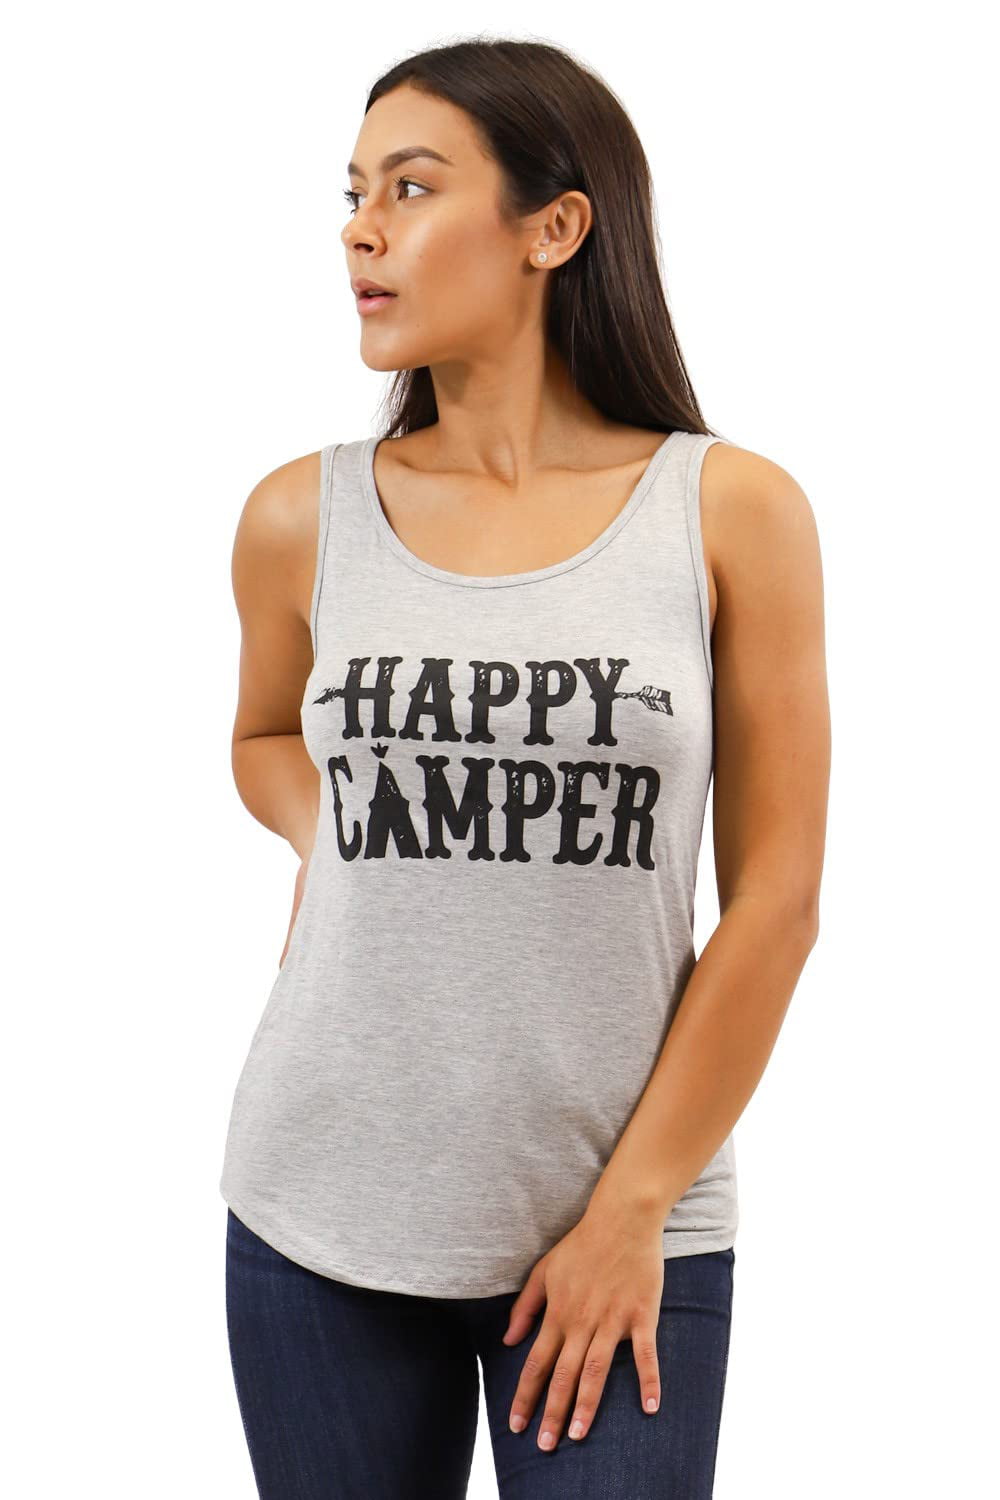 L, Heather Gray Shirts with Sayings Yoga Tee Heather Gray or Royal Blue Women's Graphic Racerback Tank Top Funny Gift for Her Happy Camper